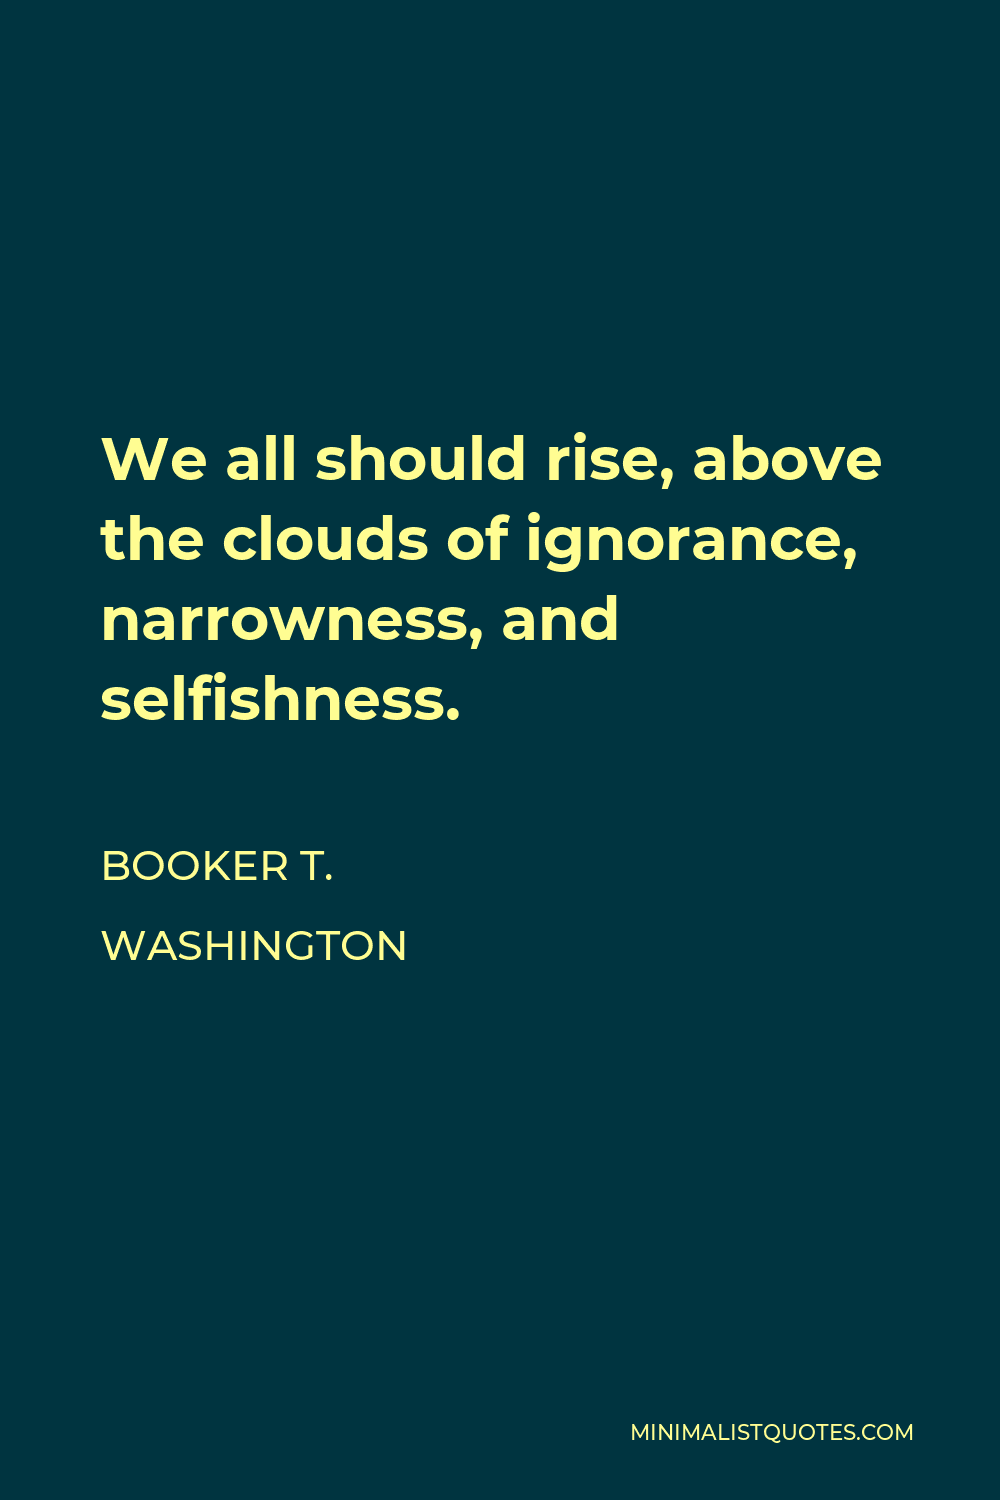 Booker T. Washington Quote - We all should rise, above the clouds of ignorance, narrowness, and selfishness.